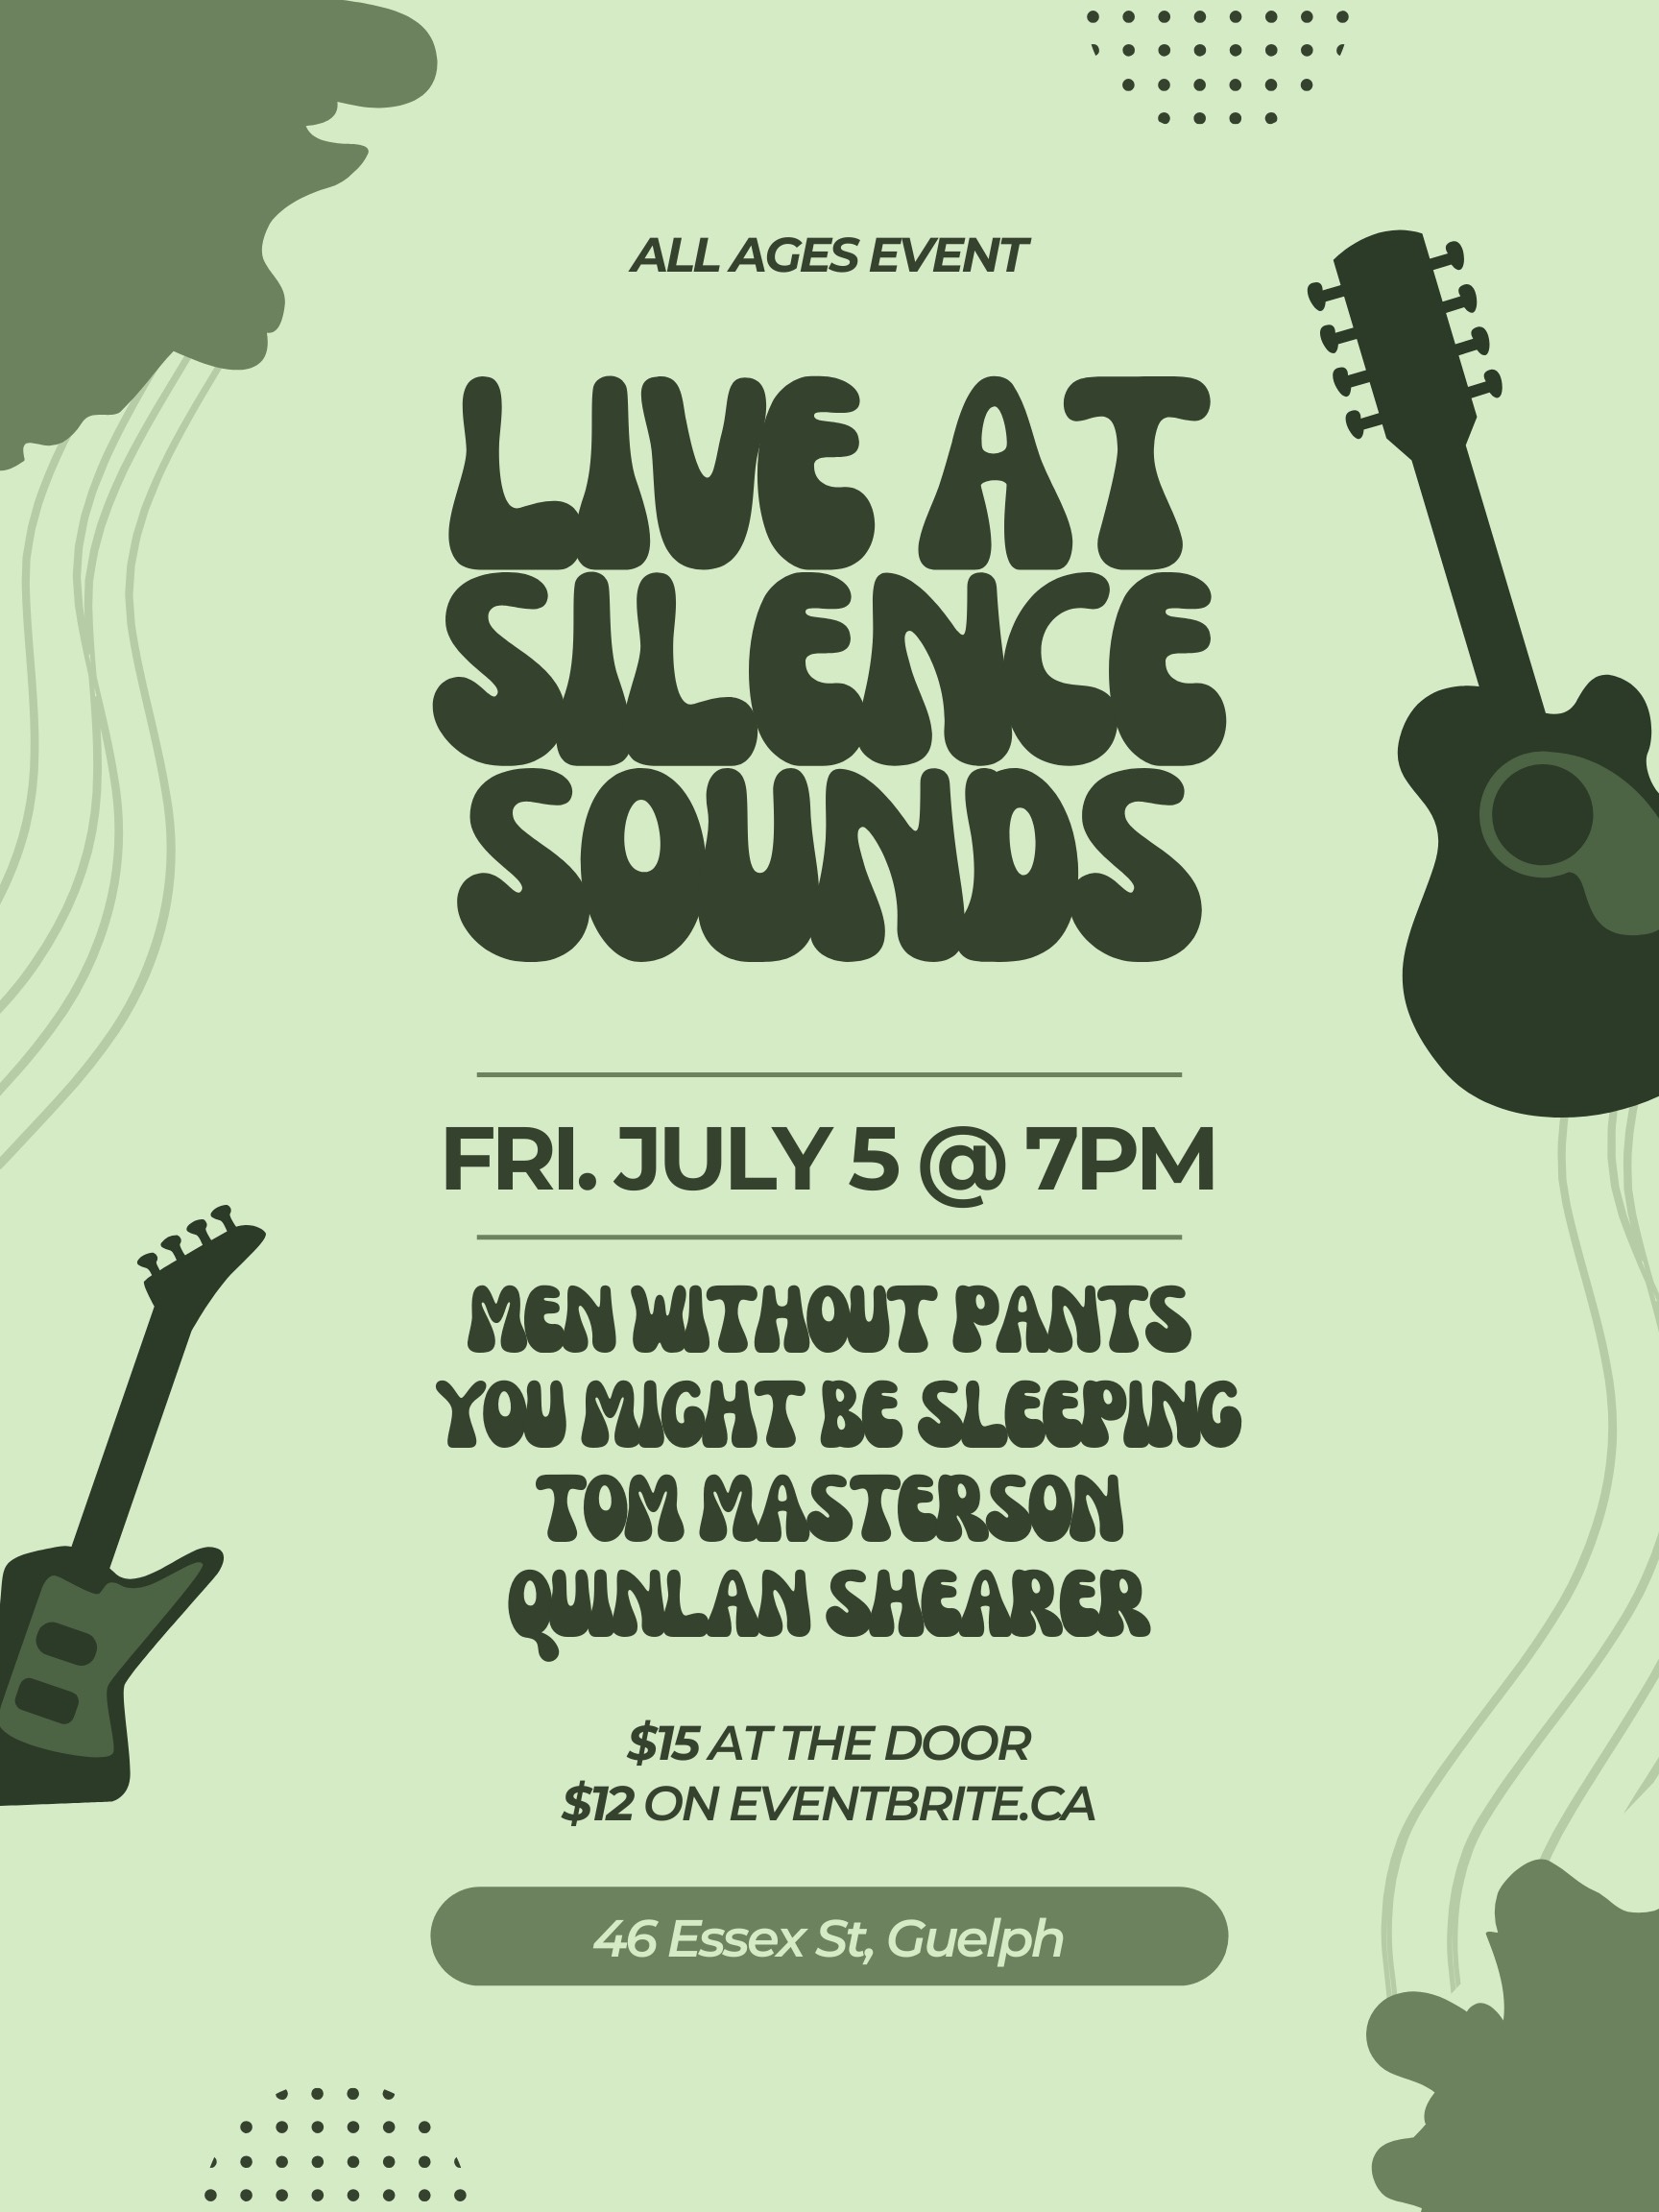 LIVE AT SILENCE SOUNDS